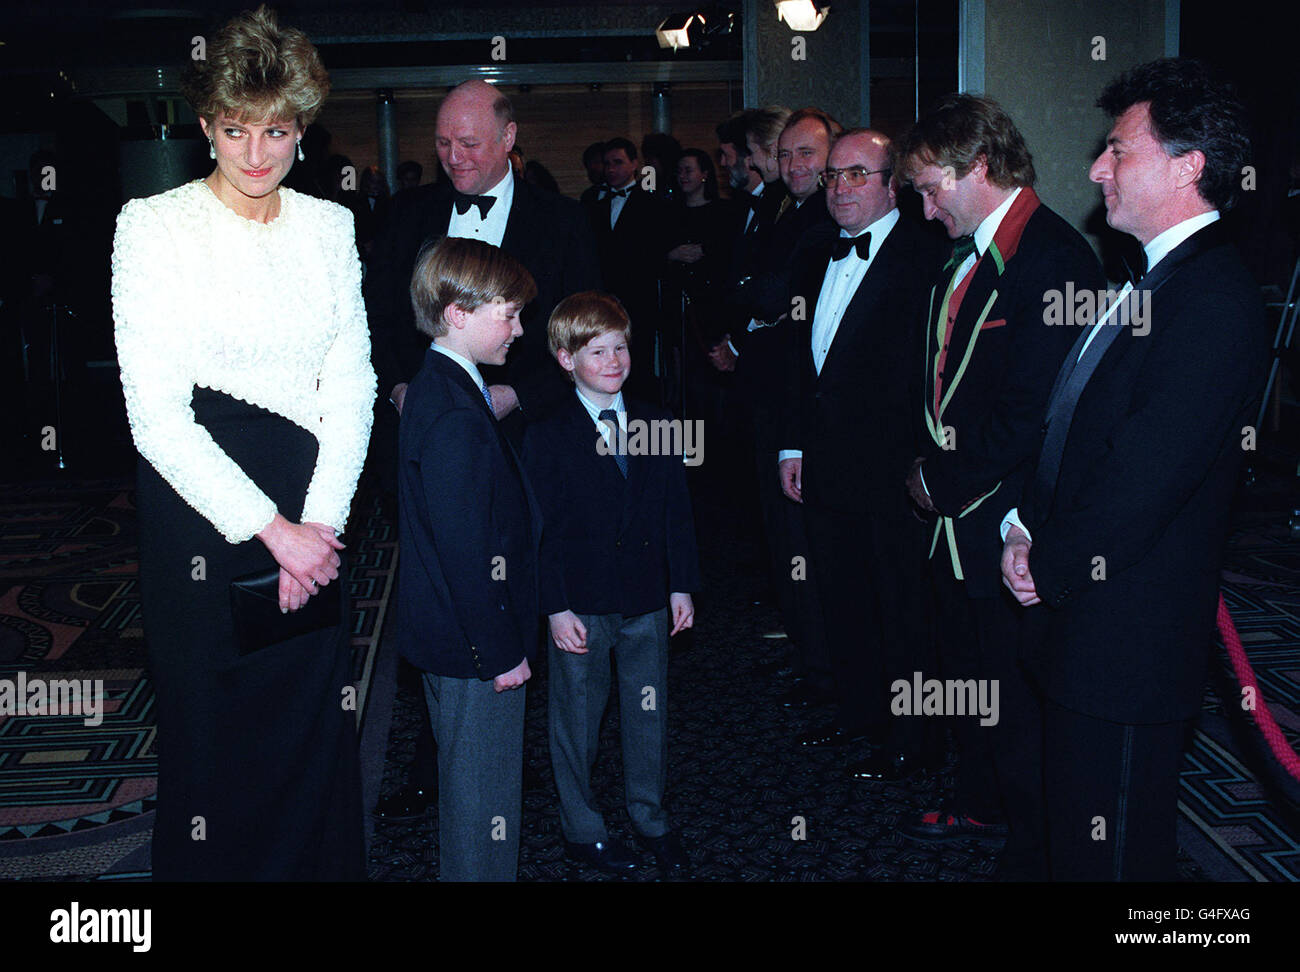 PA NEWS PHOTO 7/4/92 THE PRINCESS OF WALES AND HER TWO SONS, PRINCES WILLIAM (LEFT) AND HARRY, MEET SOME OF THE STARS OF STEVEN SPEILBERG'S LATEST FILM 'HOOK' AT THE ODEON, LEICESTER SQUARE. STARS ATTENDING THE ROYAL PREMIERE INCLUDED (FROM RIGHT) DUSTIN HOFFMAN, ROBIN WILLIAMS, BOB HOSKINS AND PHIL COLLINS. Stock Photo